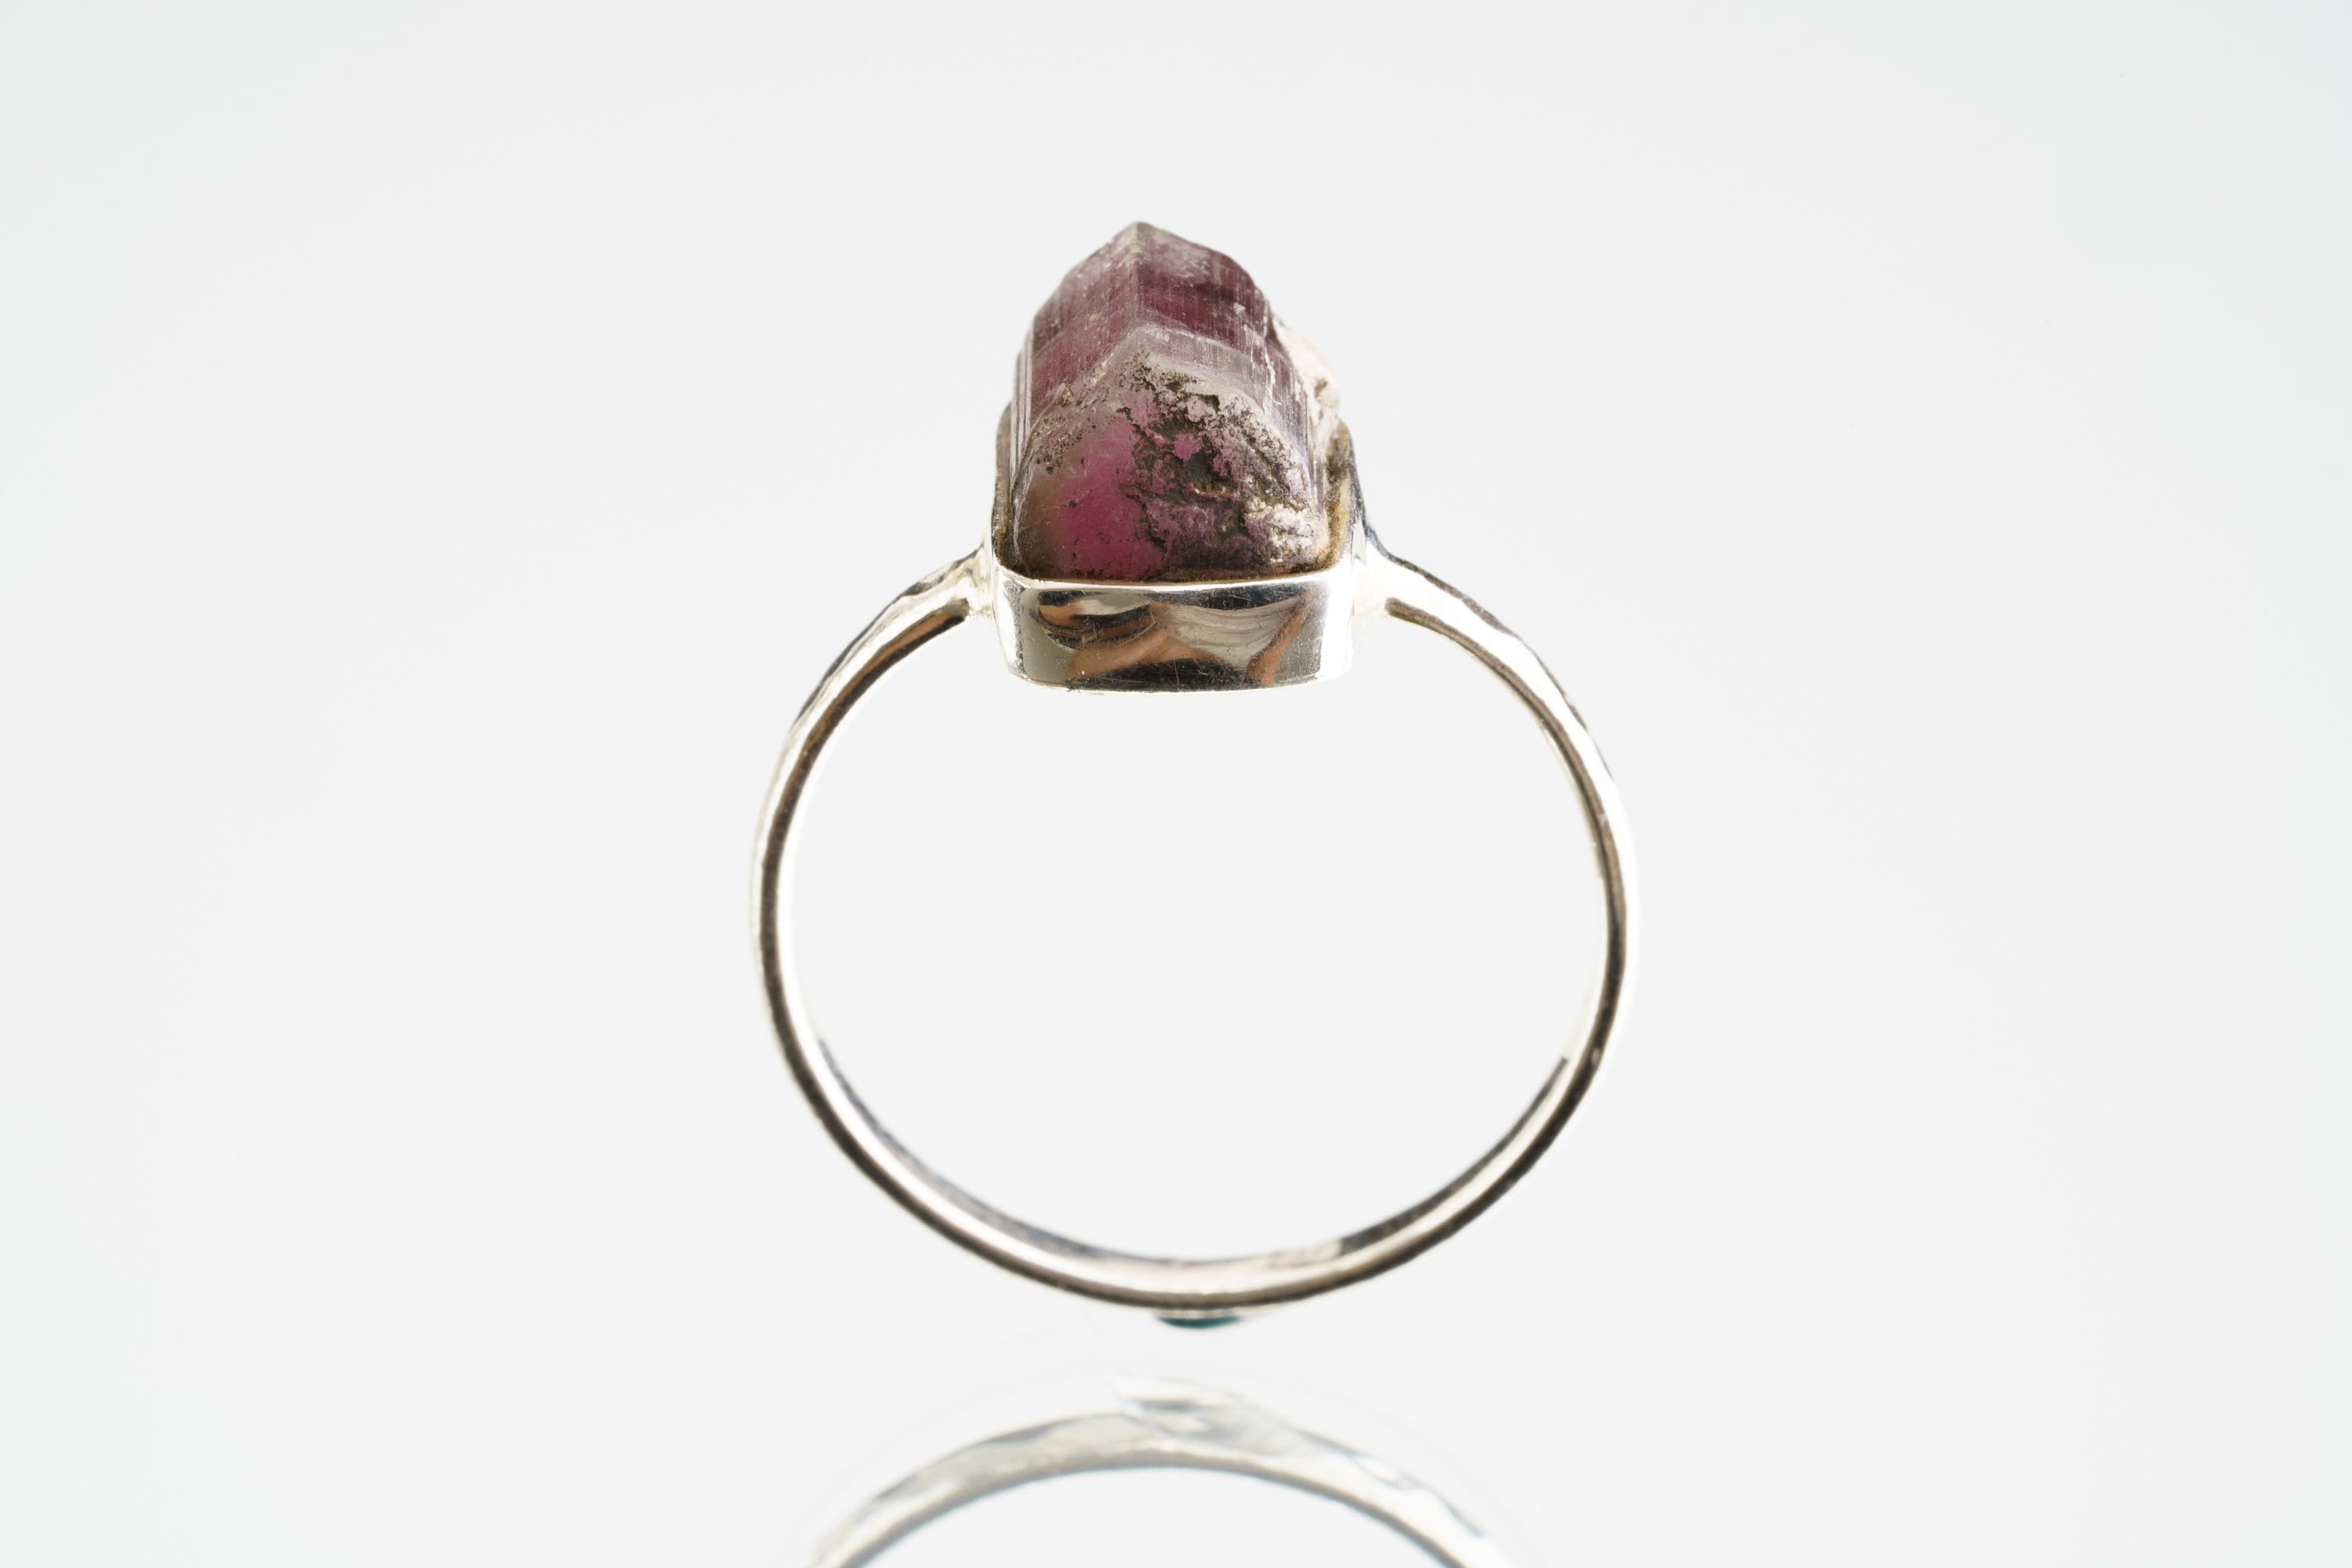 Pink gem Tourmaline Rubellite - Stack Crystal Ring - Size 4 3/4 US - 925 Sterling Silver - Thin Band Hammer Textured